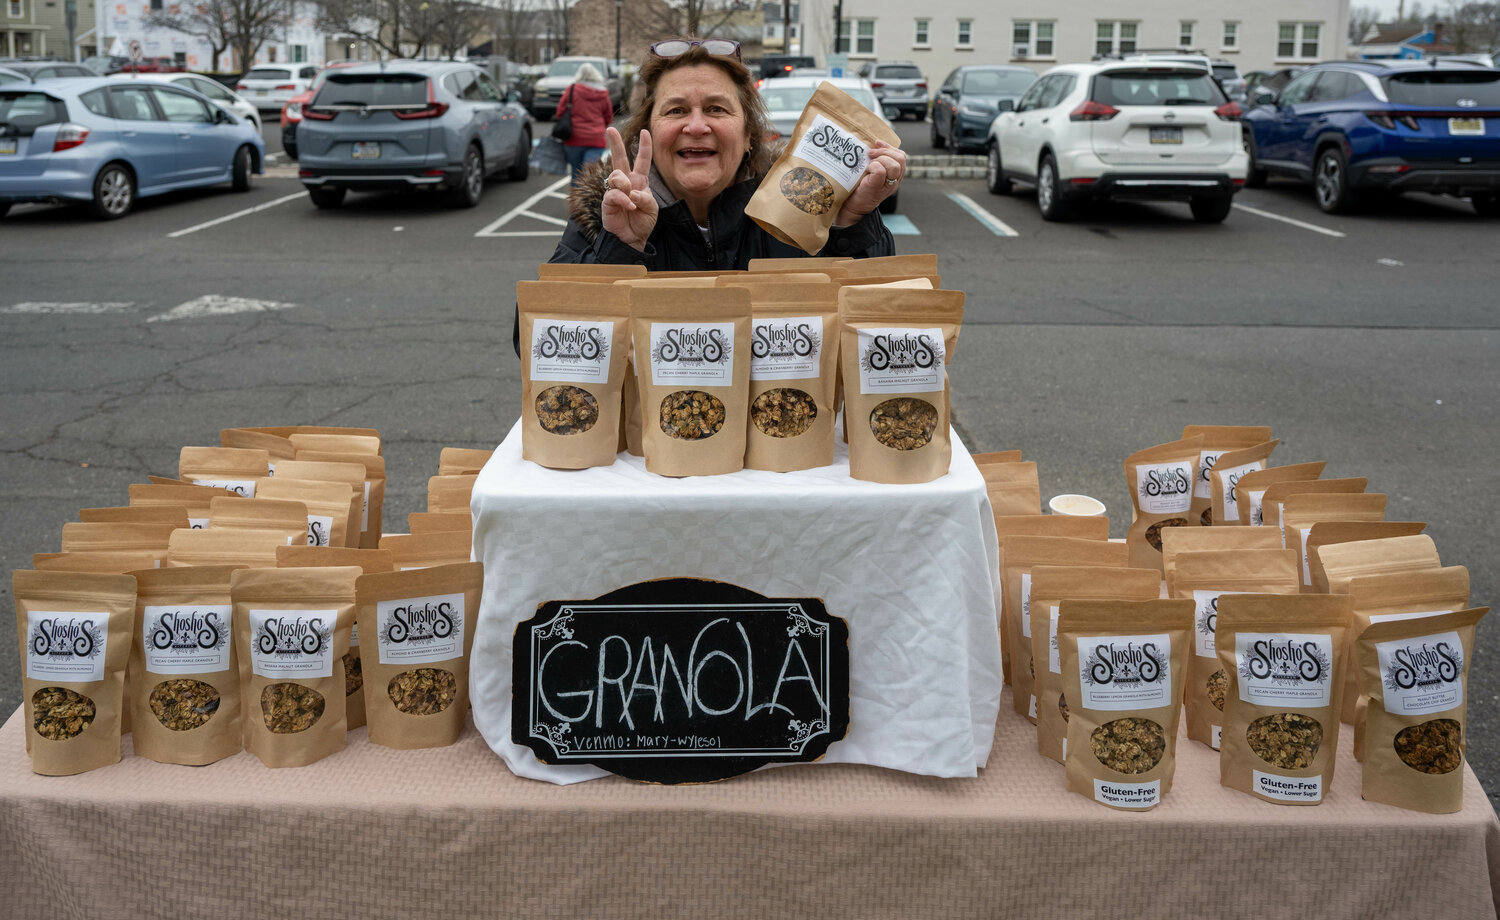 Mary Wyles, of Shosho’s Kitchen, sells granola.